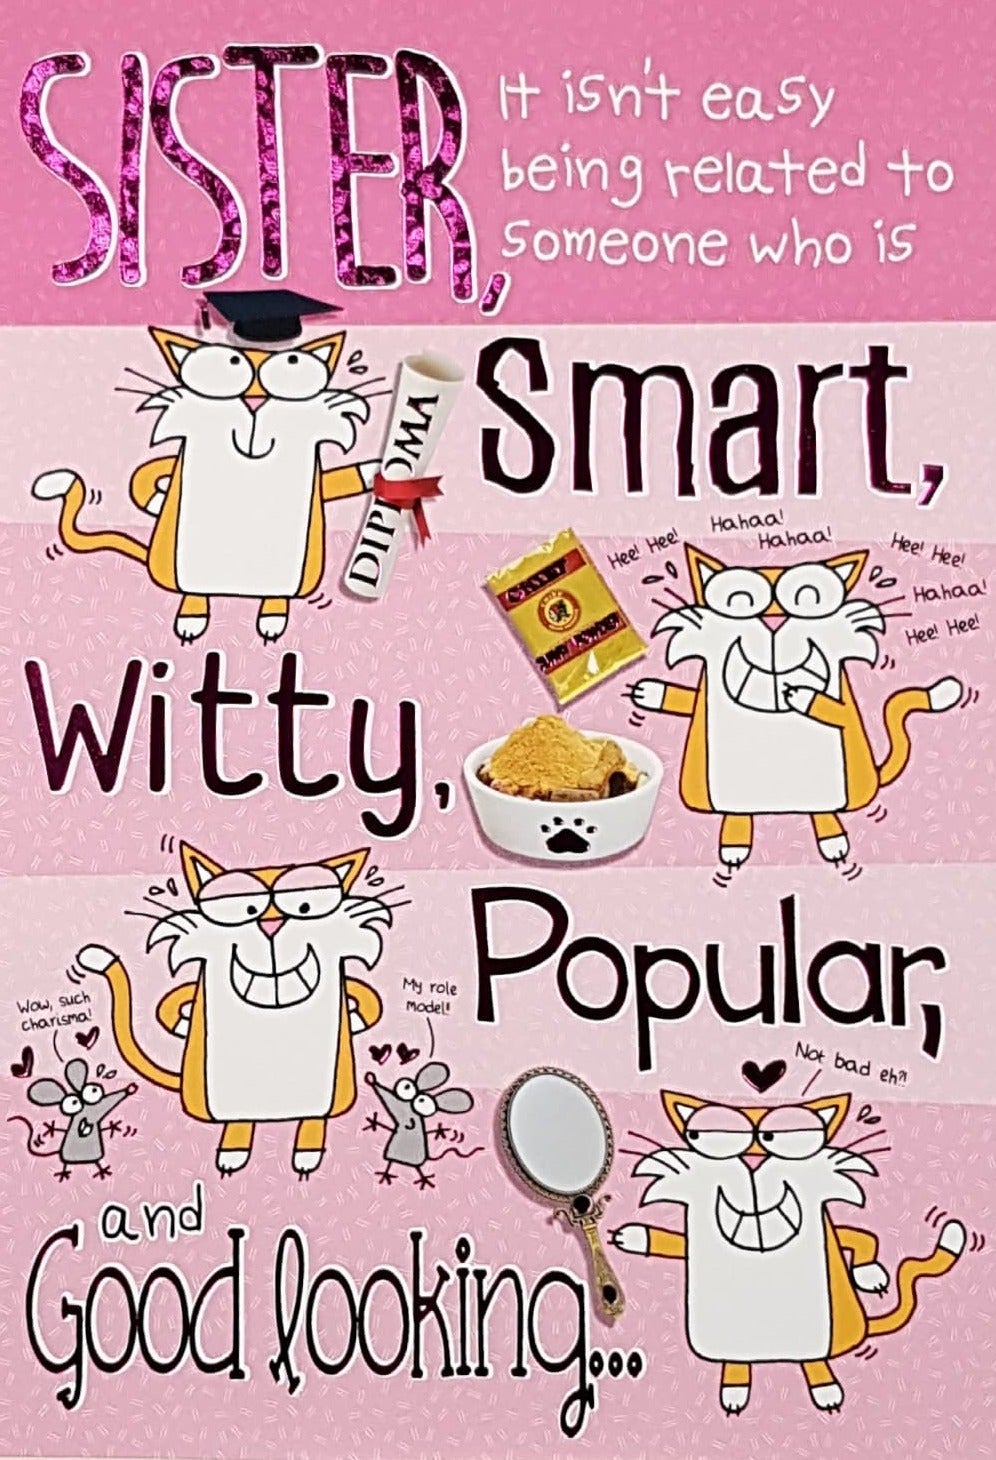 Birthday Card - Sister / A Funny Yellow Cat & Two Mice